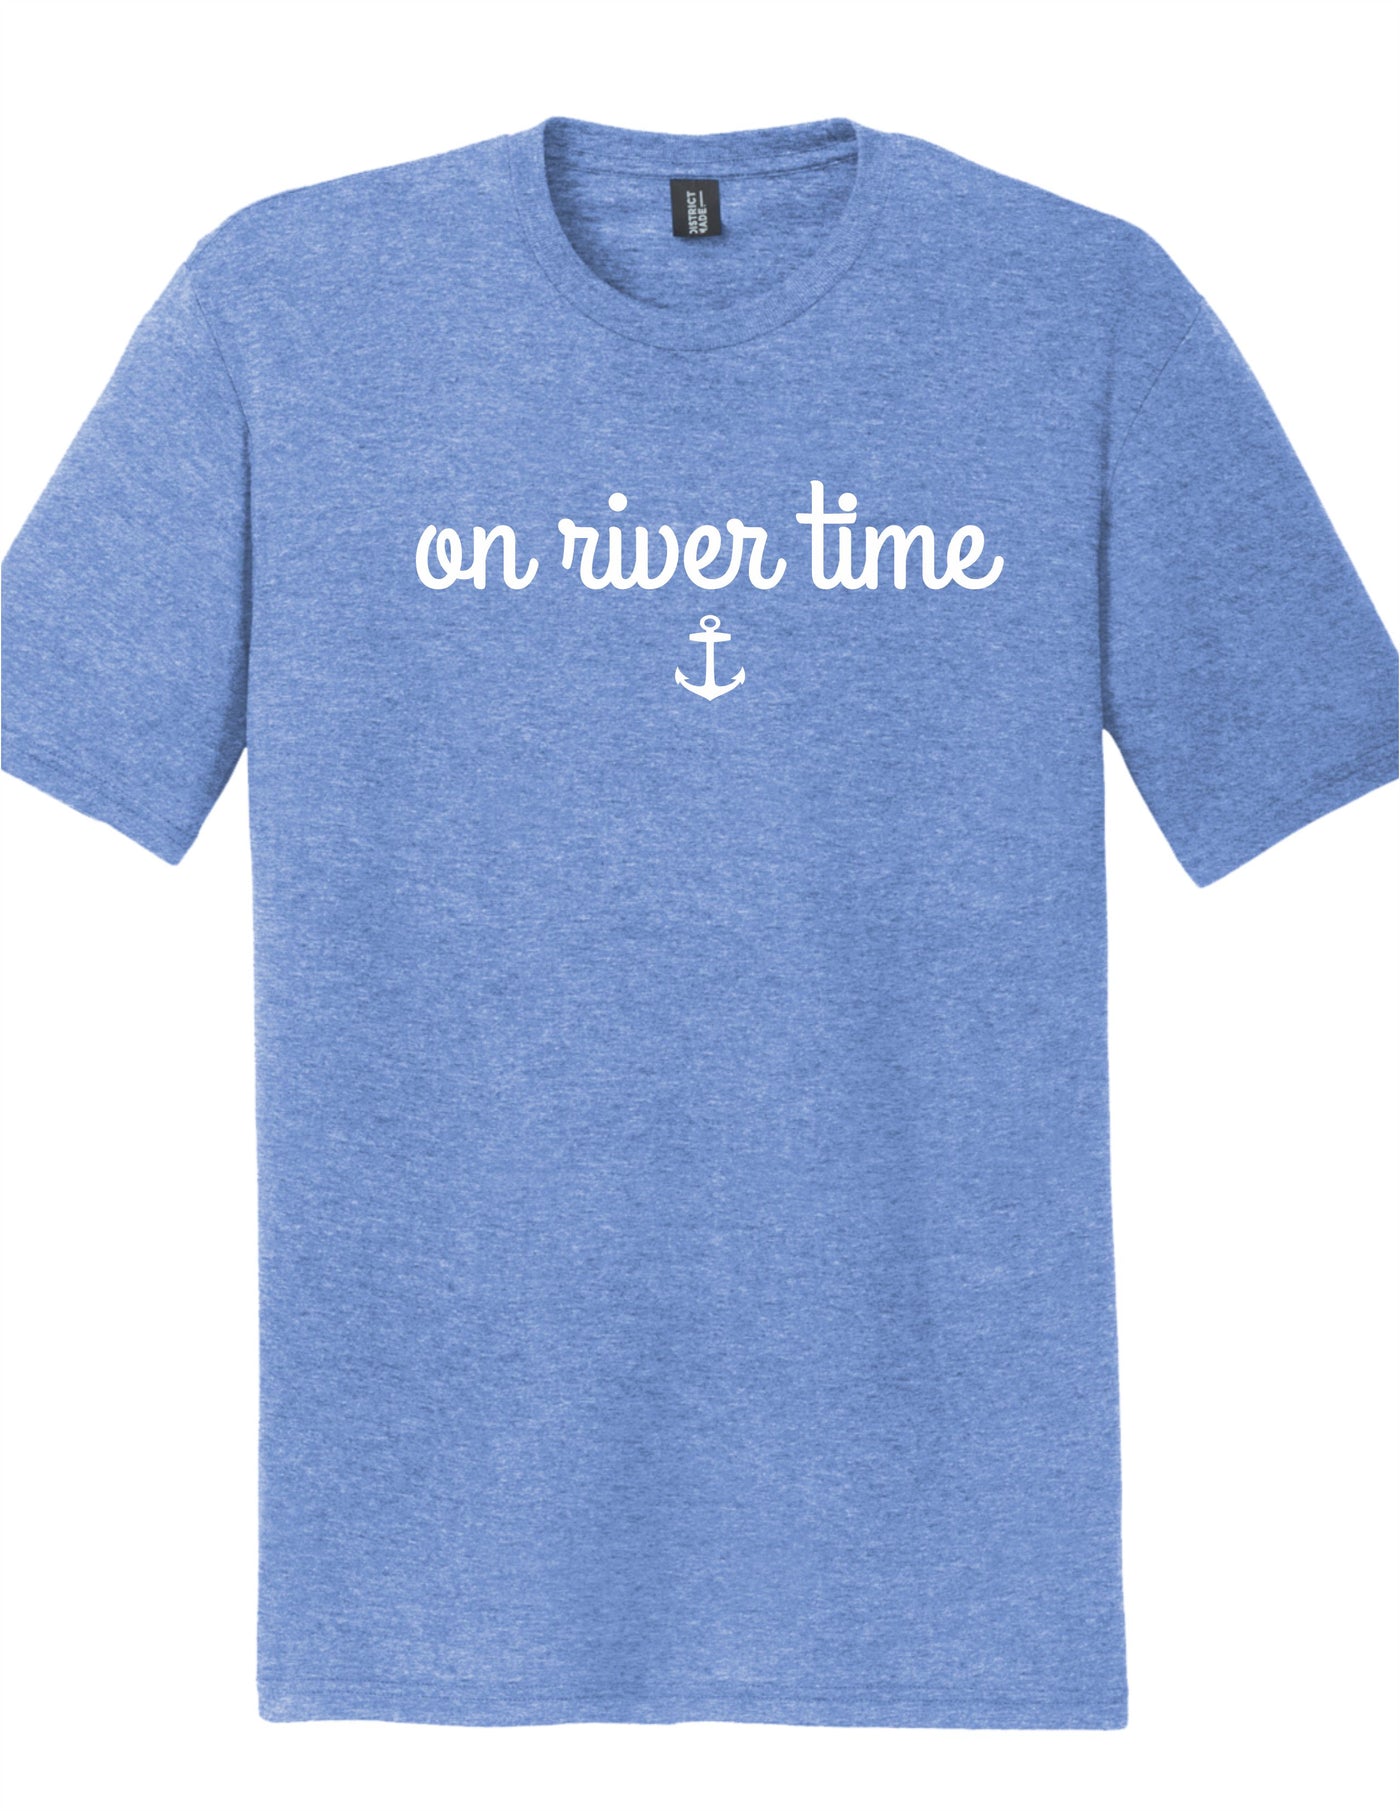 On River Time T-shirt